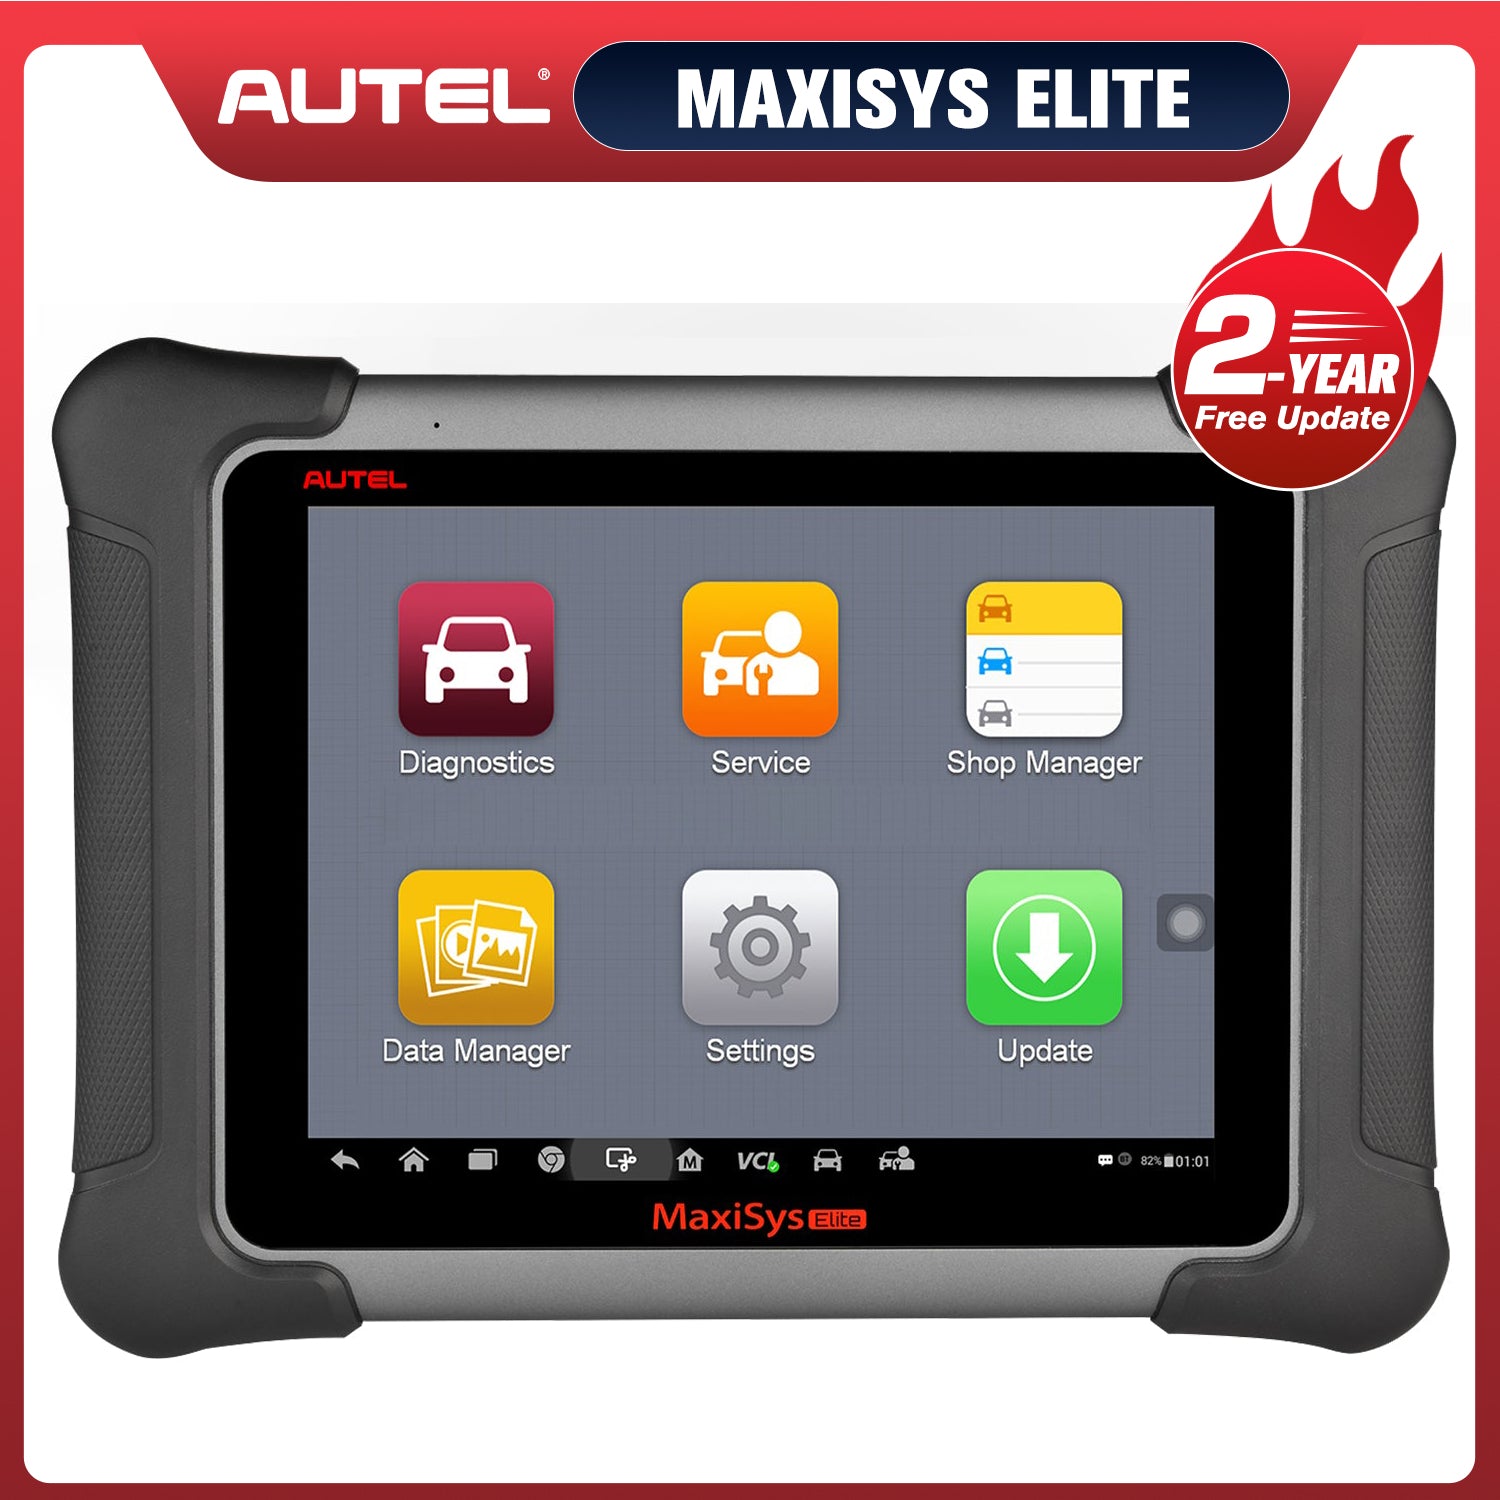 [Auto 5% Off] Autel Maxisys Elite Diagnostic Tool with J2534 ECU Programming Device and 2Year Free Update, Upgraded Version of MK908P